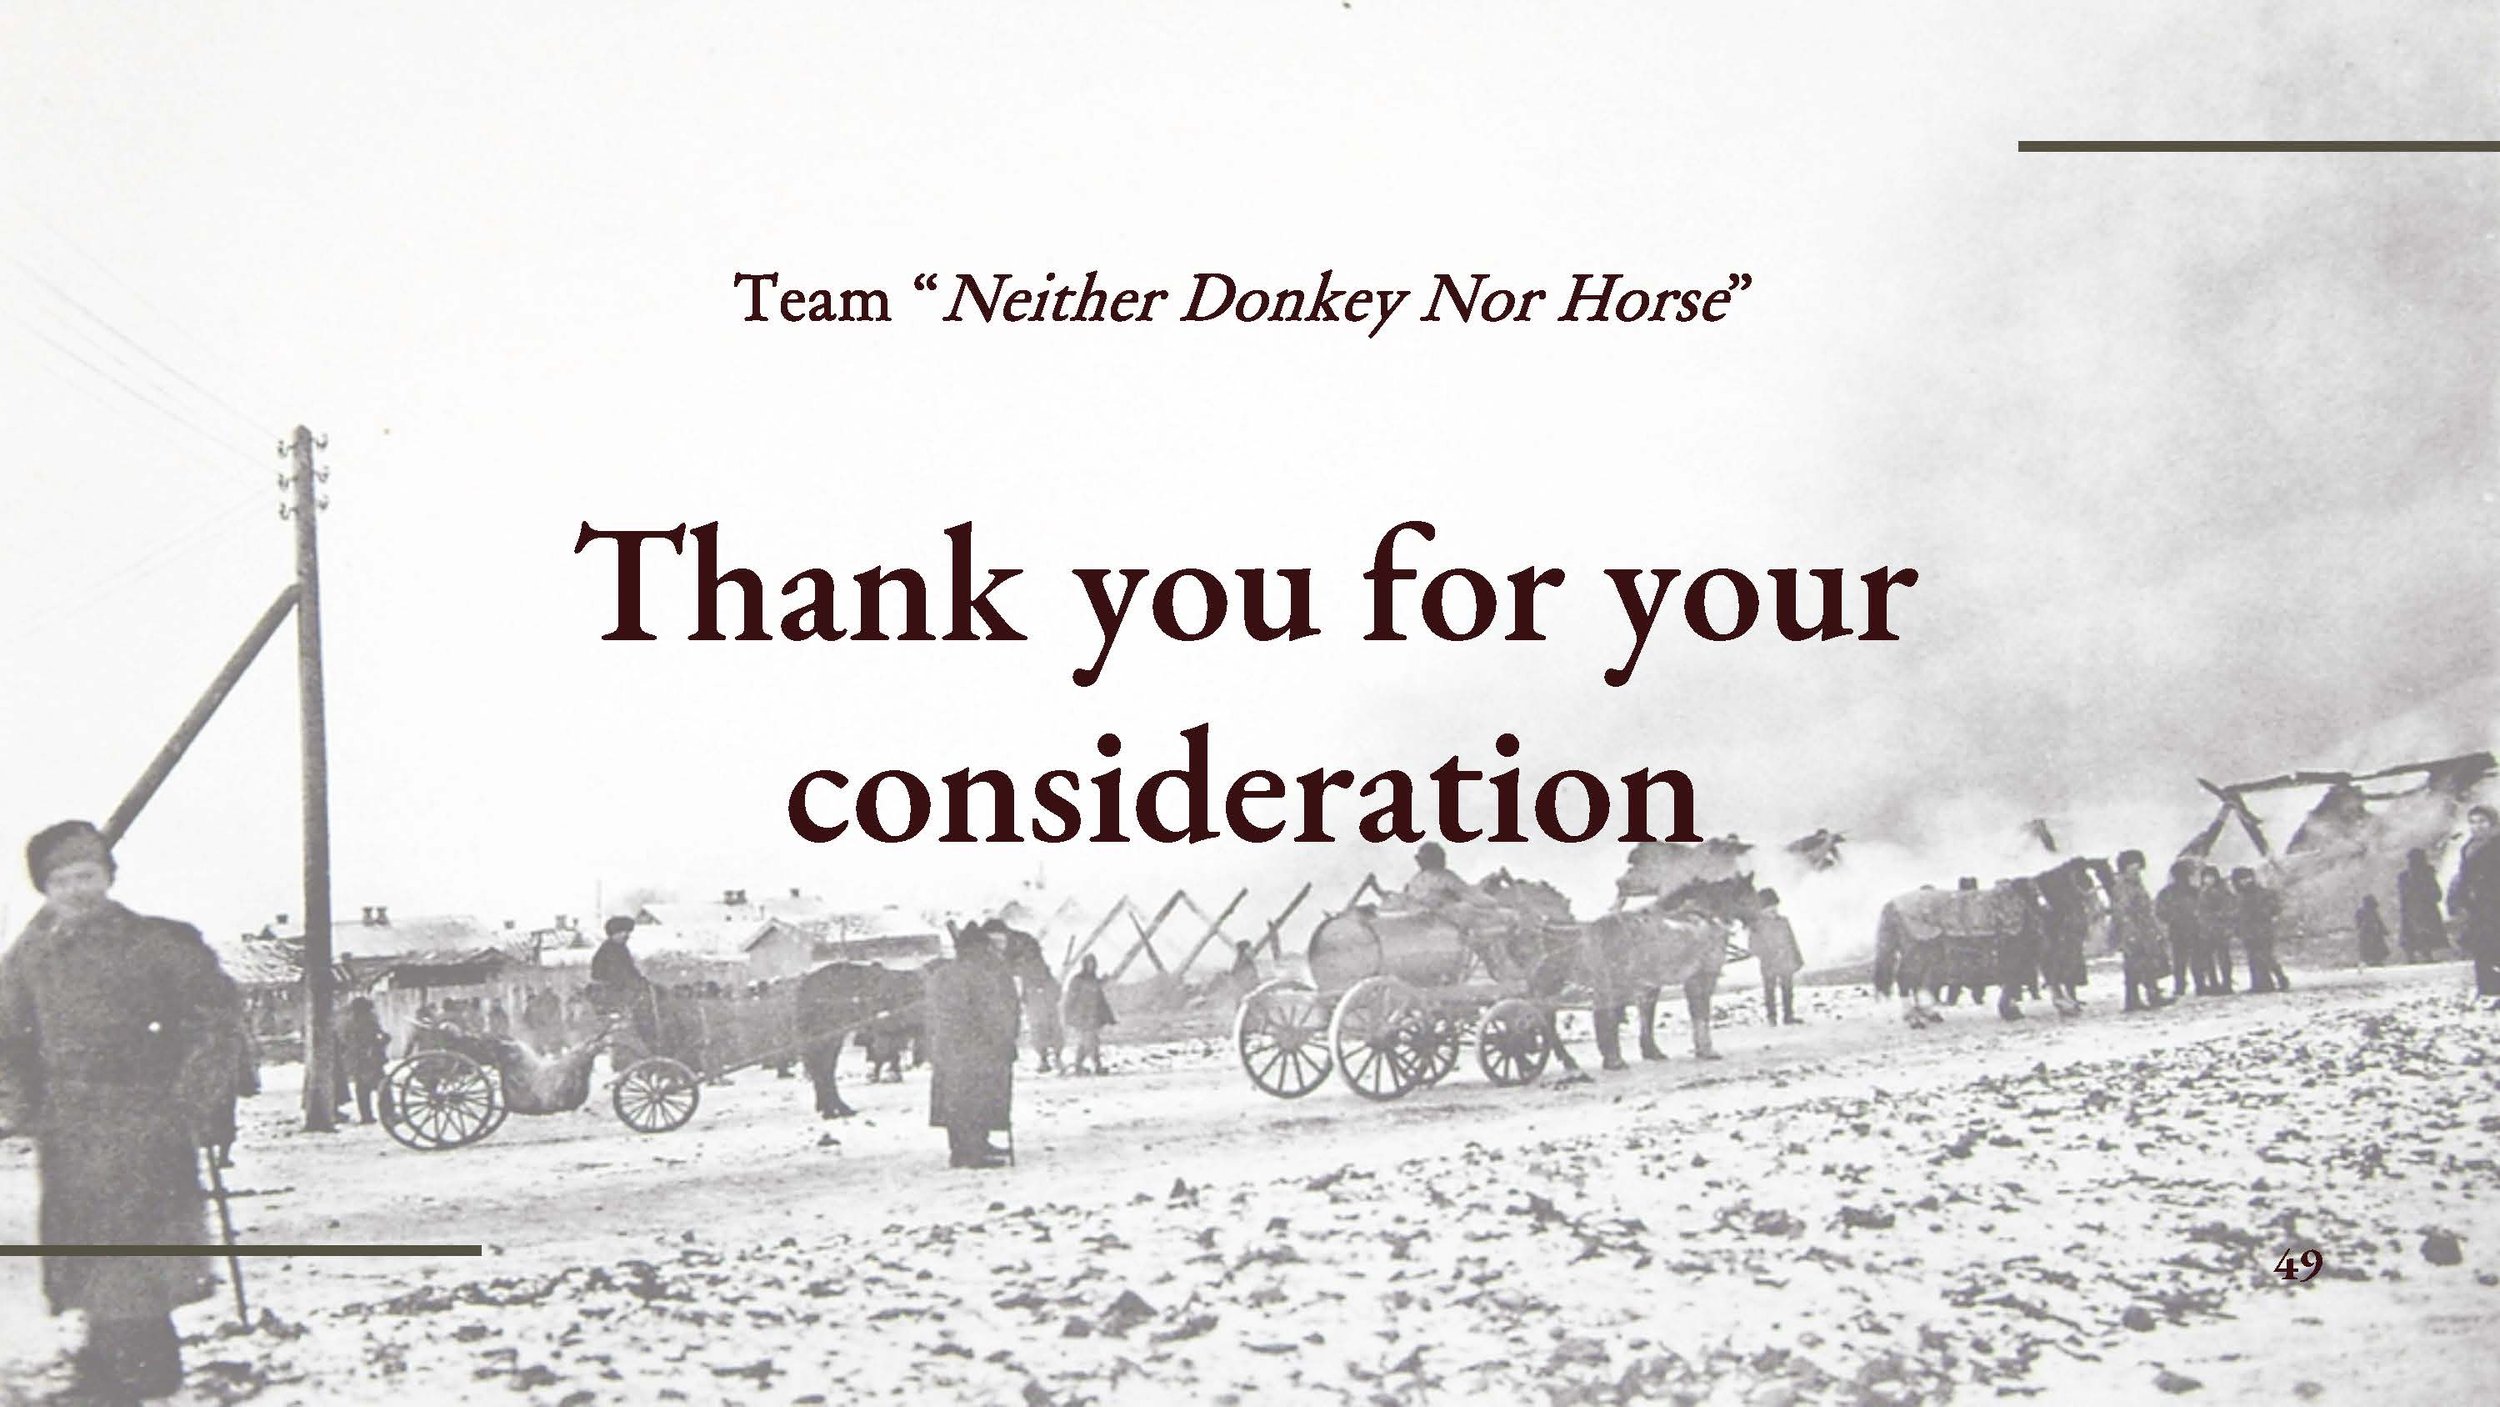 Neither Donkey Nor Horse Pitch Deck 0502 (1) 48.jpg